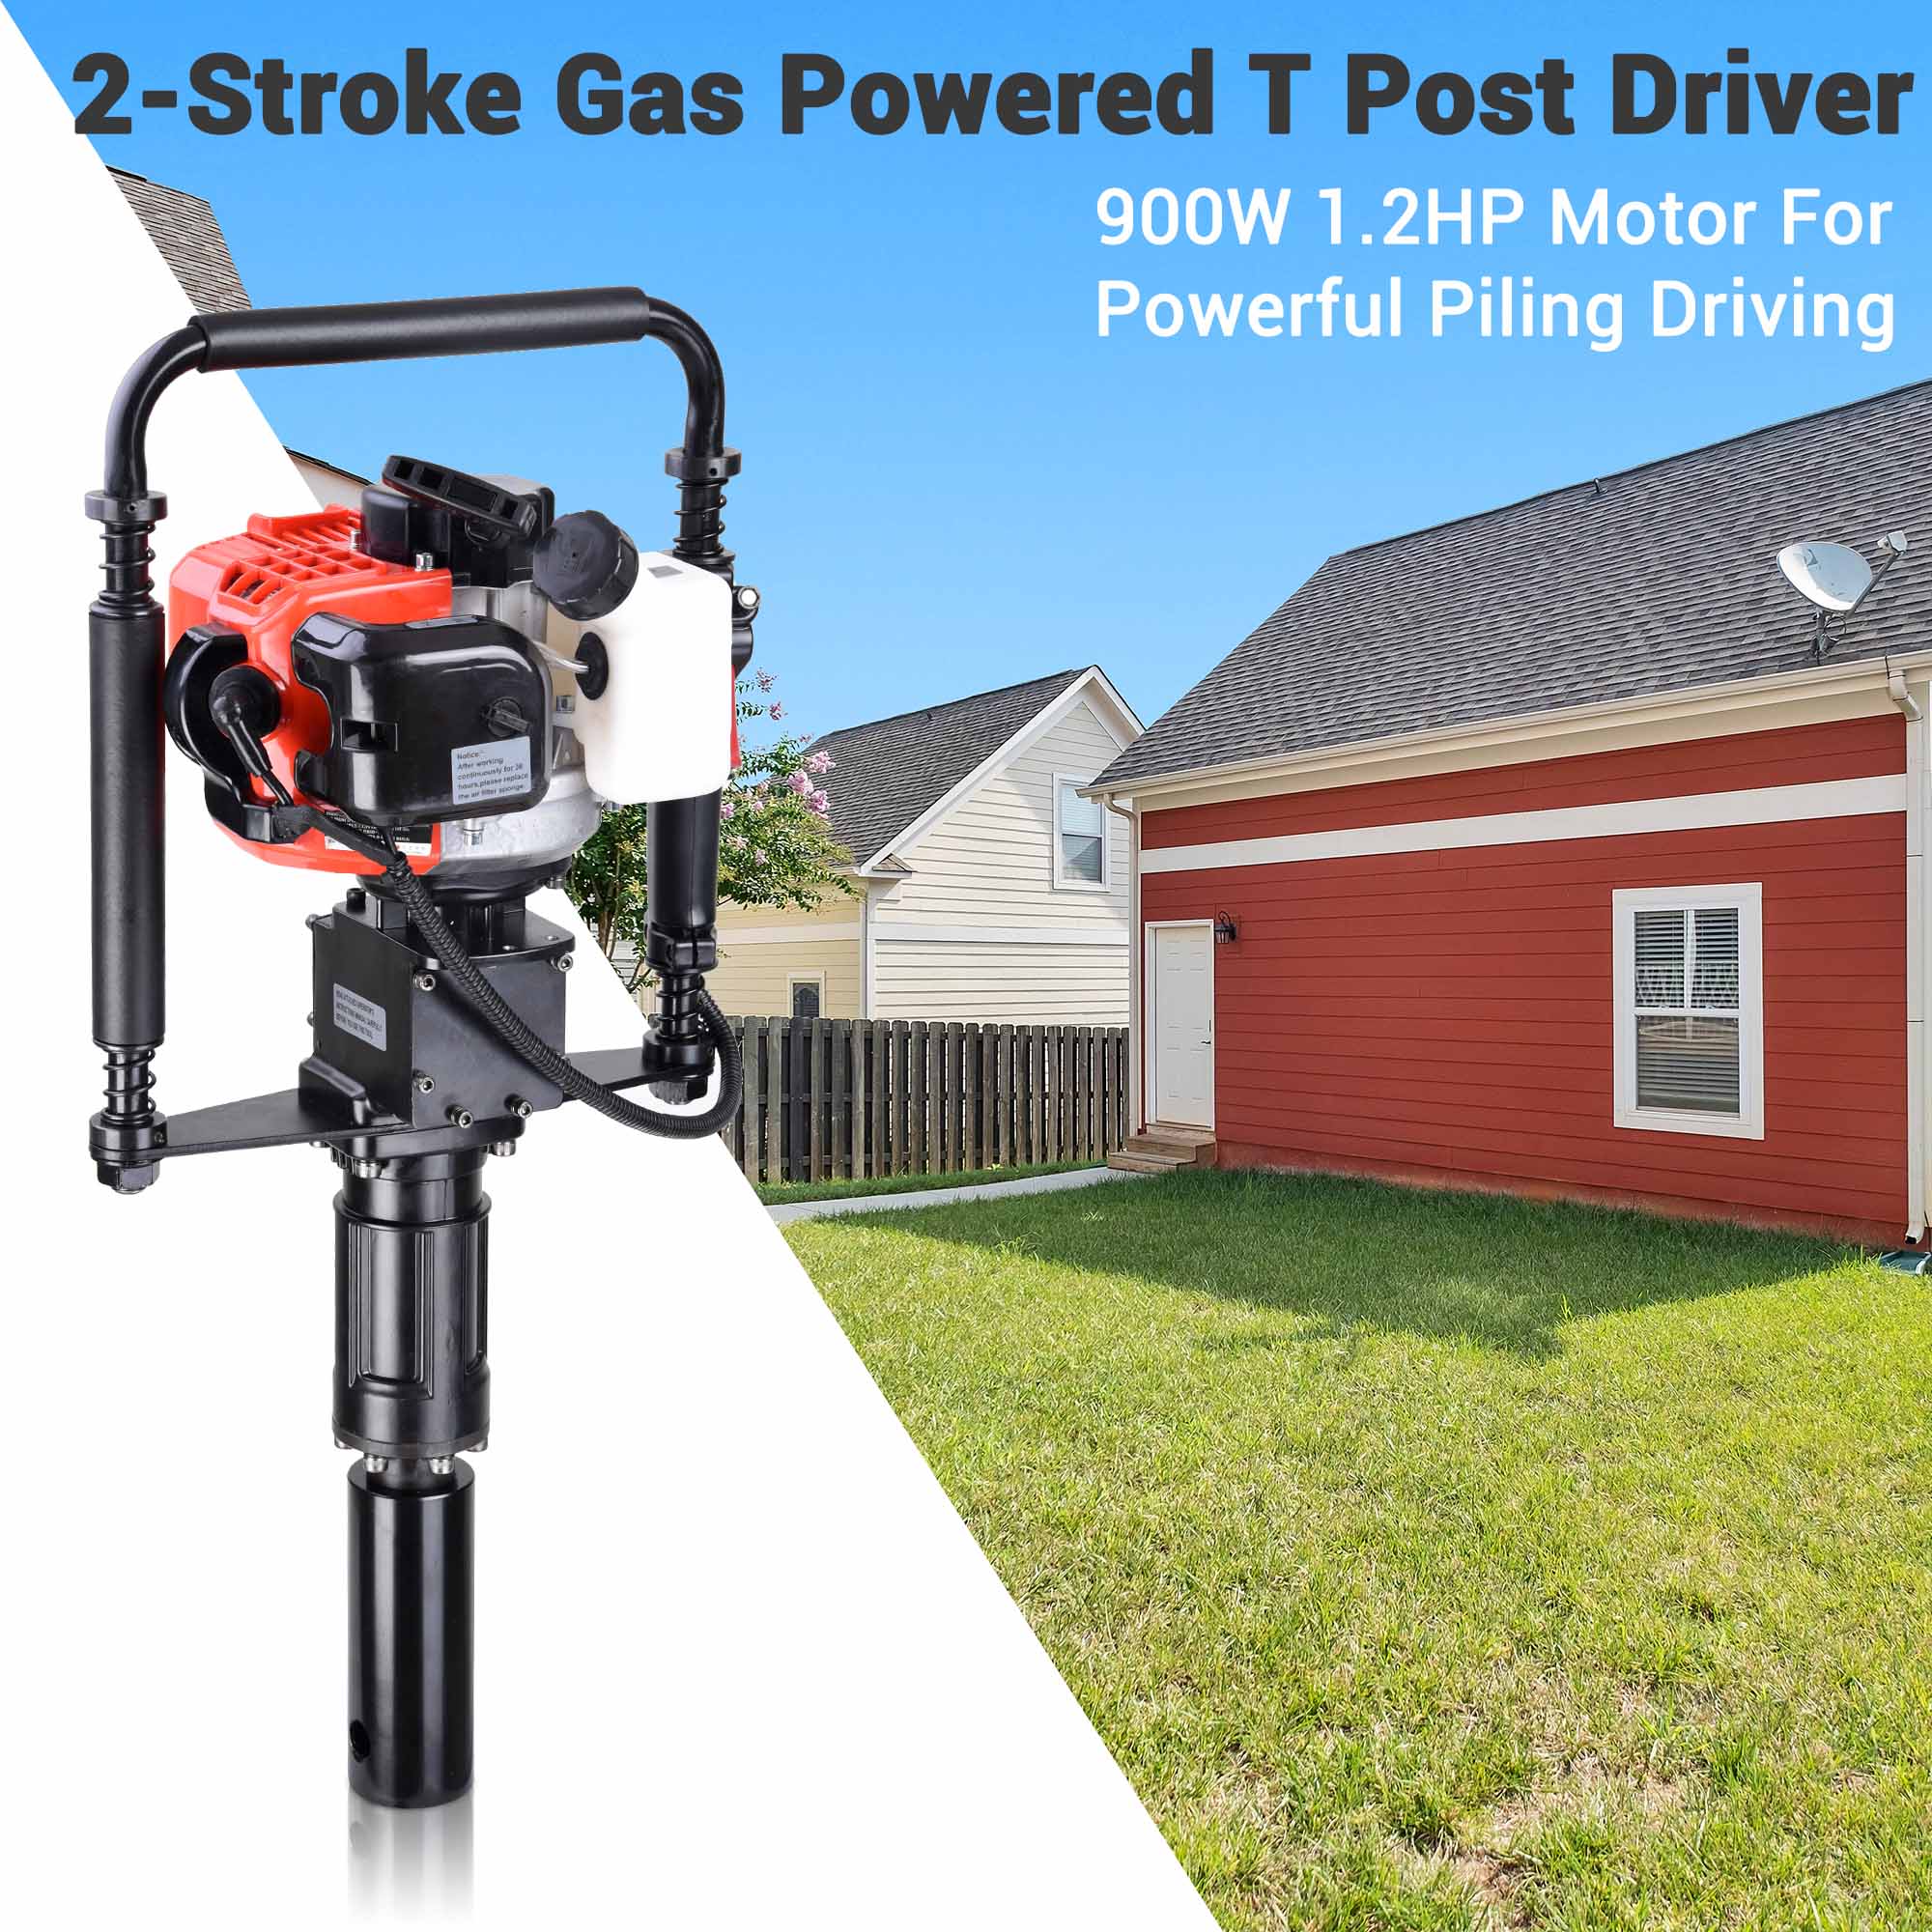 Yescom 900W Stroke T Post Driver 32.7CC Gas Powered Portable Fence Pile  Hammer Gasoline Motor Pile Driver with Piling Head Tools EPA Engine 